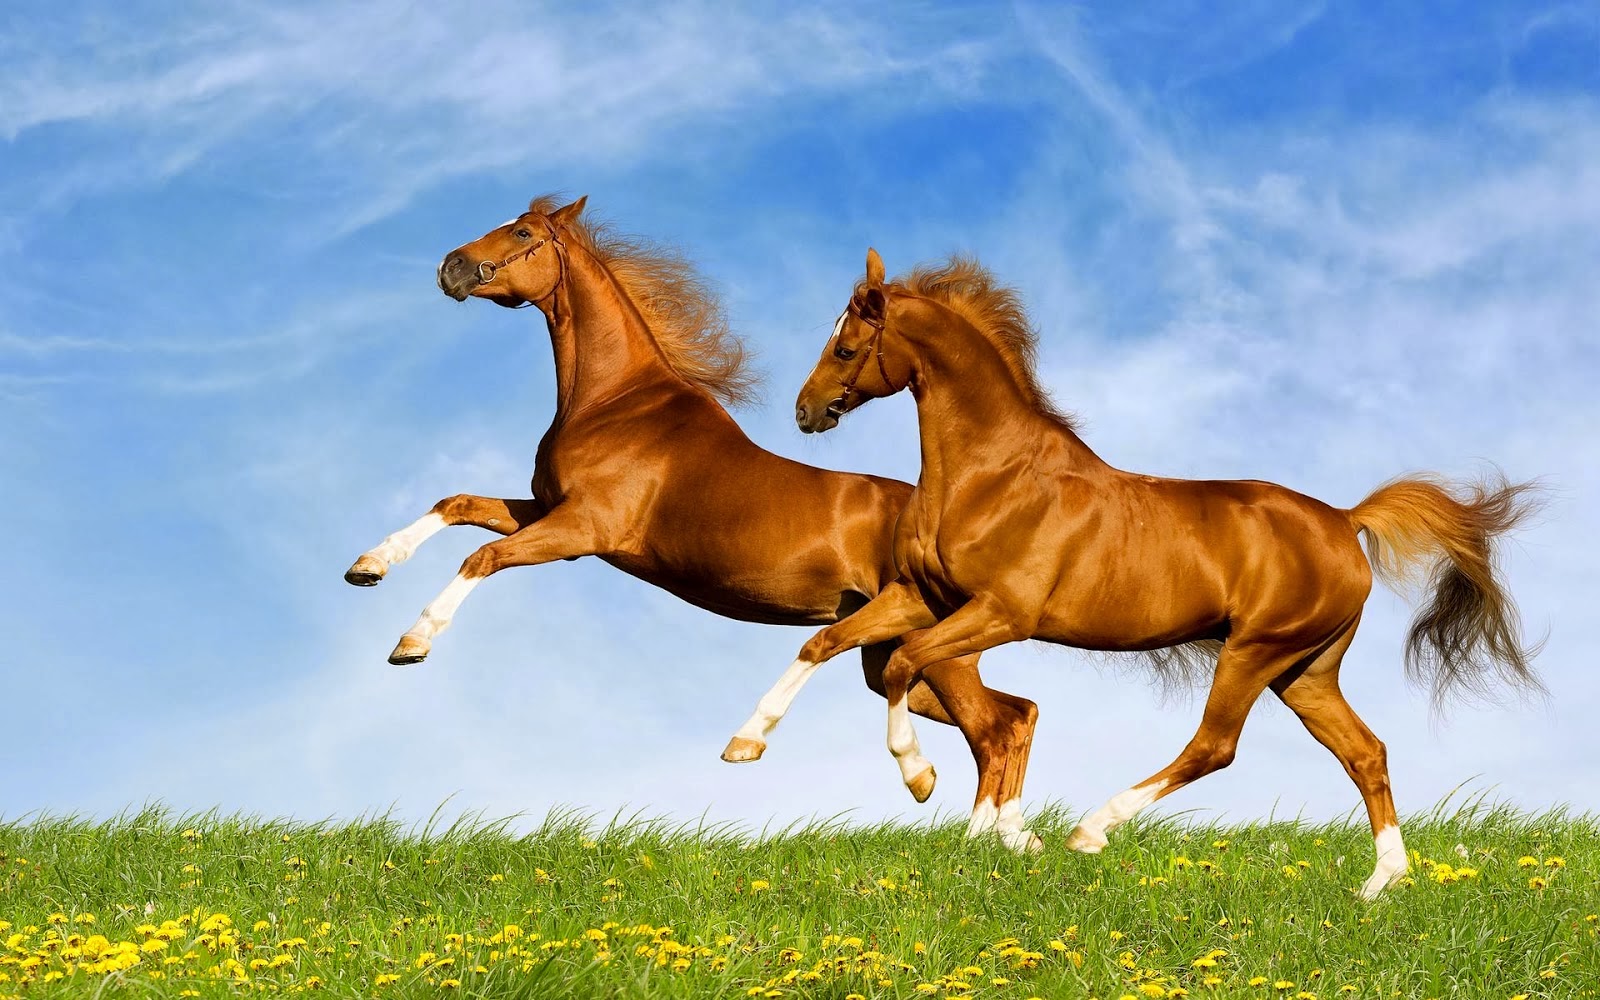 Horse And Make This HD Wallpaper Desktop For Your